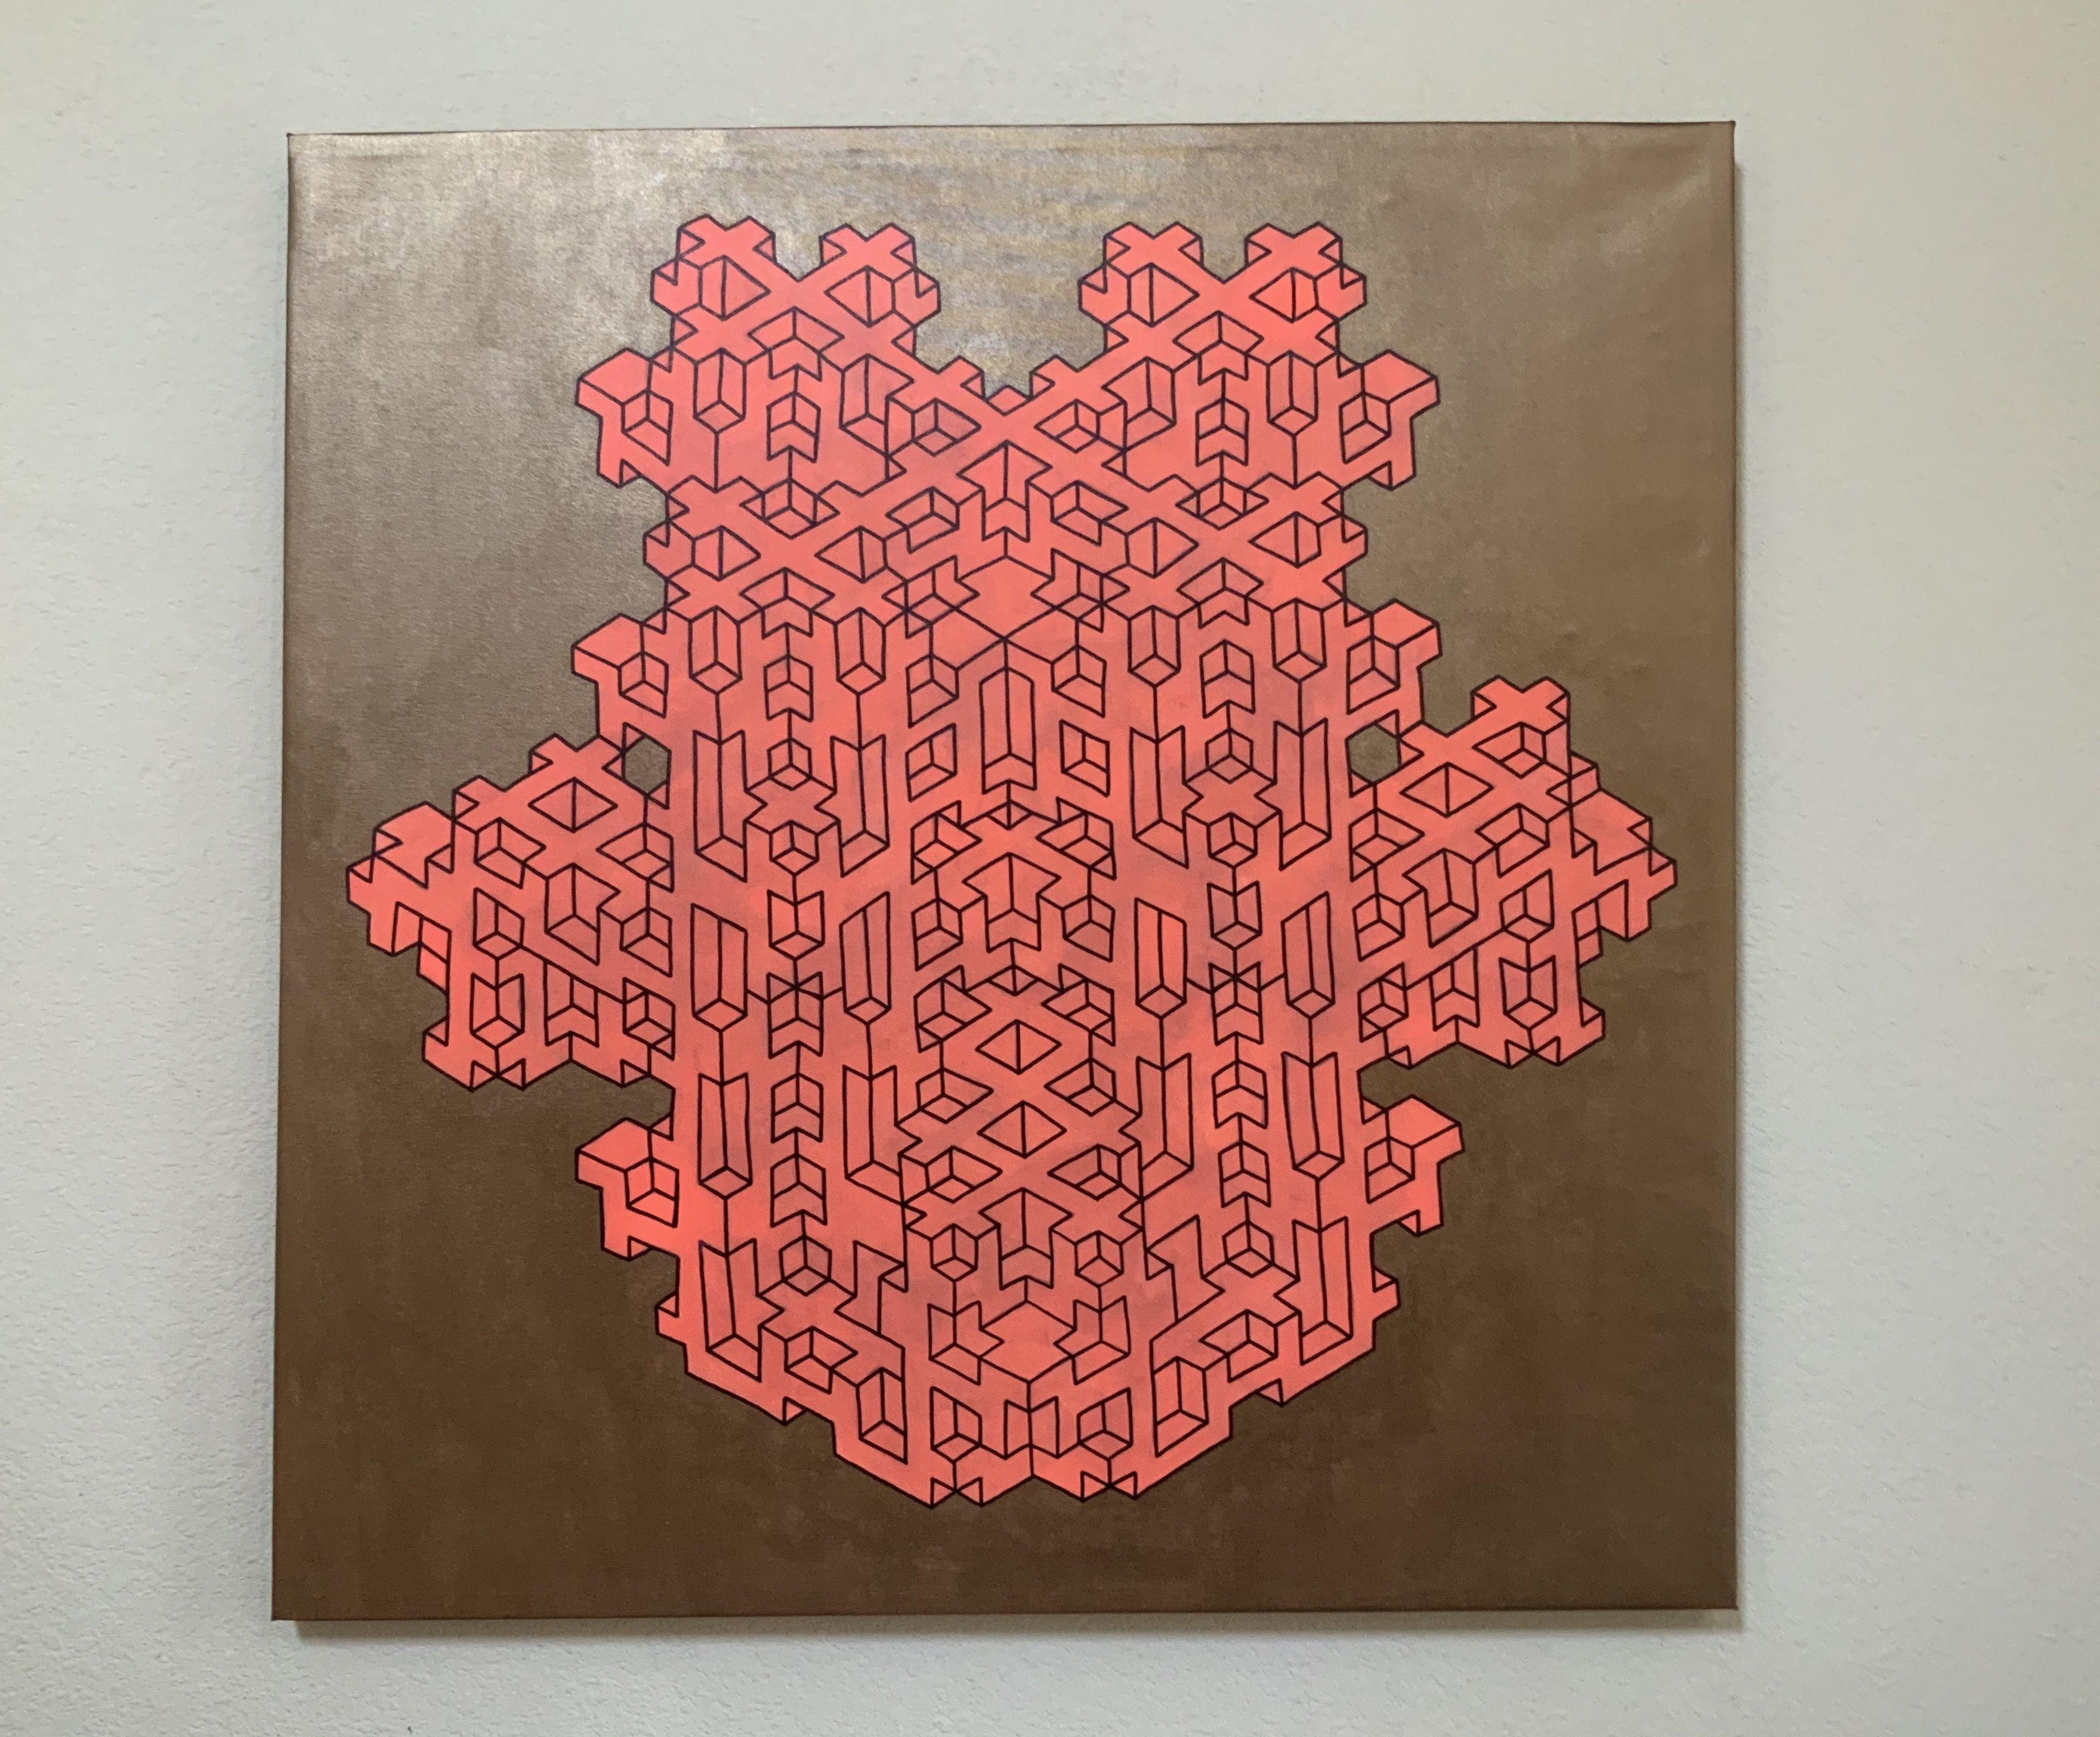 Custom built wooden frame and hand stretched canvas. This original geometric canvas painting is inspired from and directly related to my Origami Sculptures. The end result is an engineered design that is built with the forms of one of my cubic